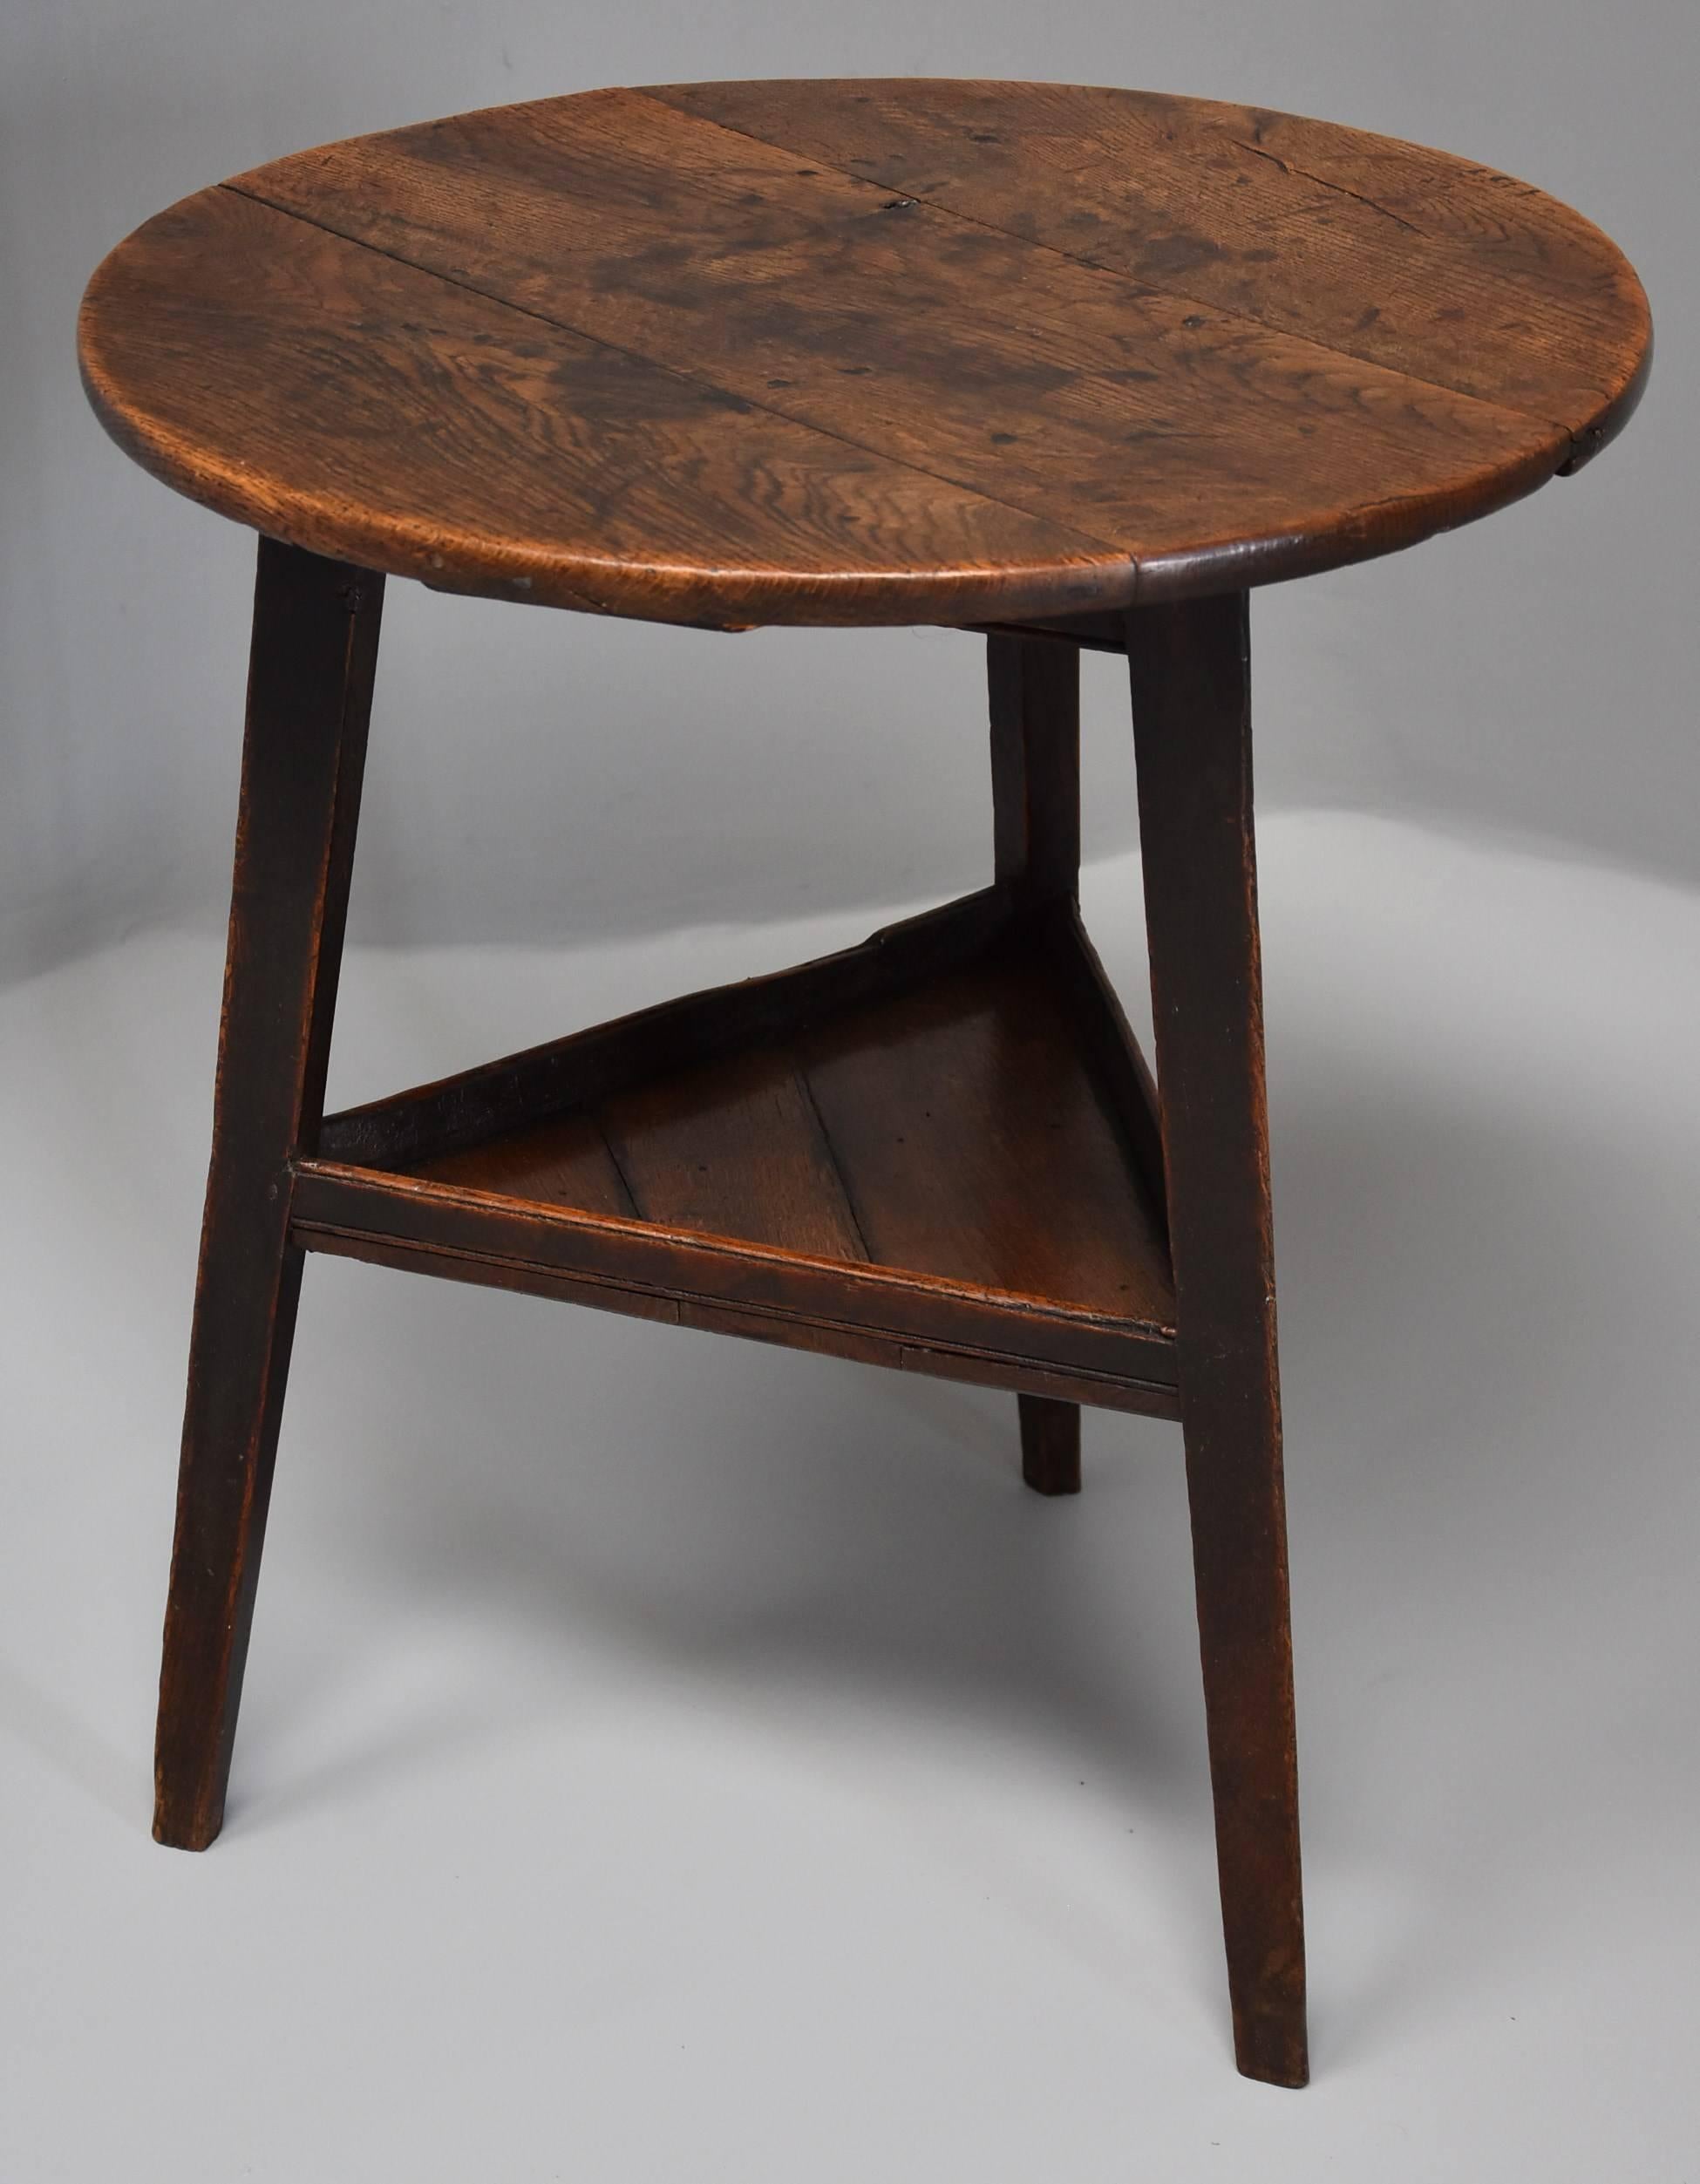 English 18th Century Oak Cricket Table or Tavern Table with Shelf and of Fine Patina